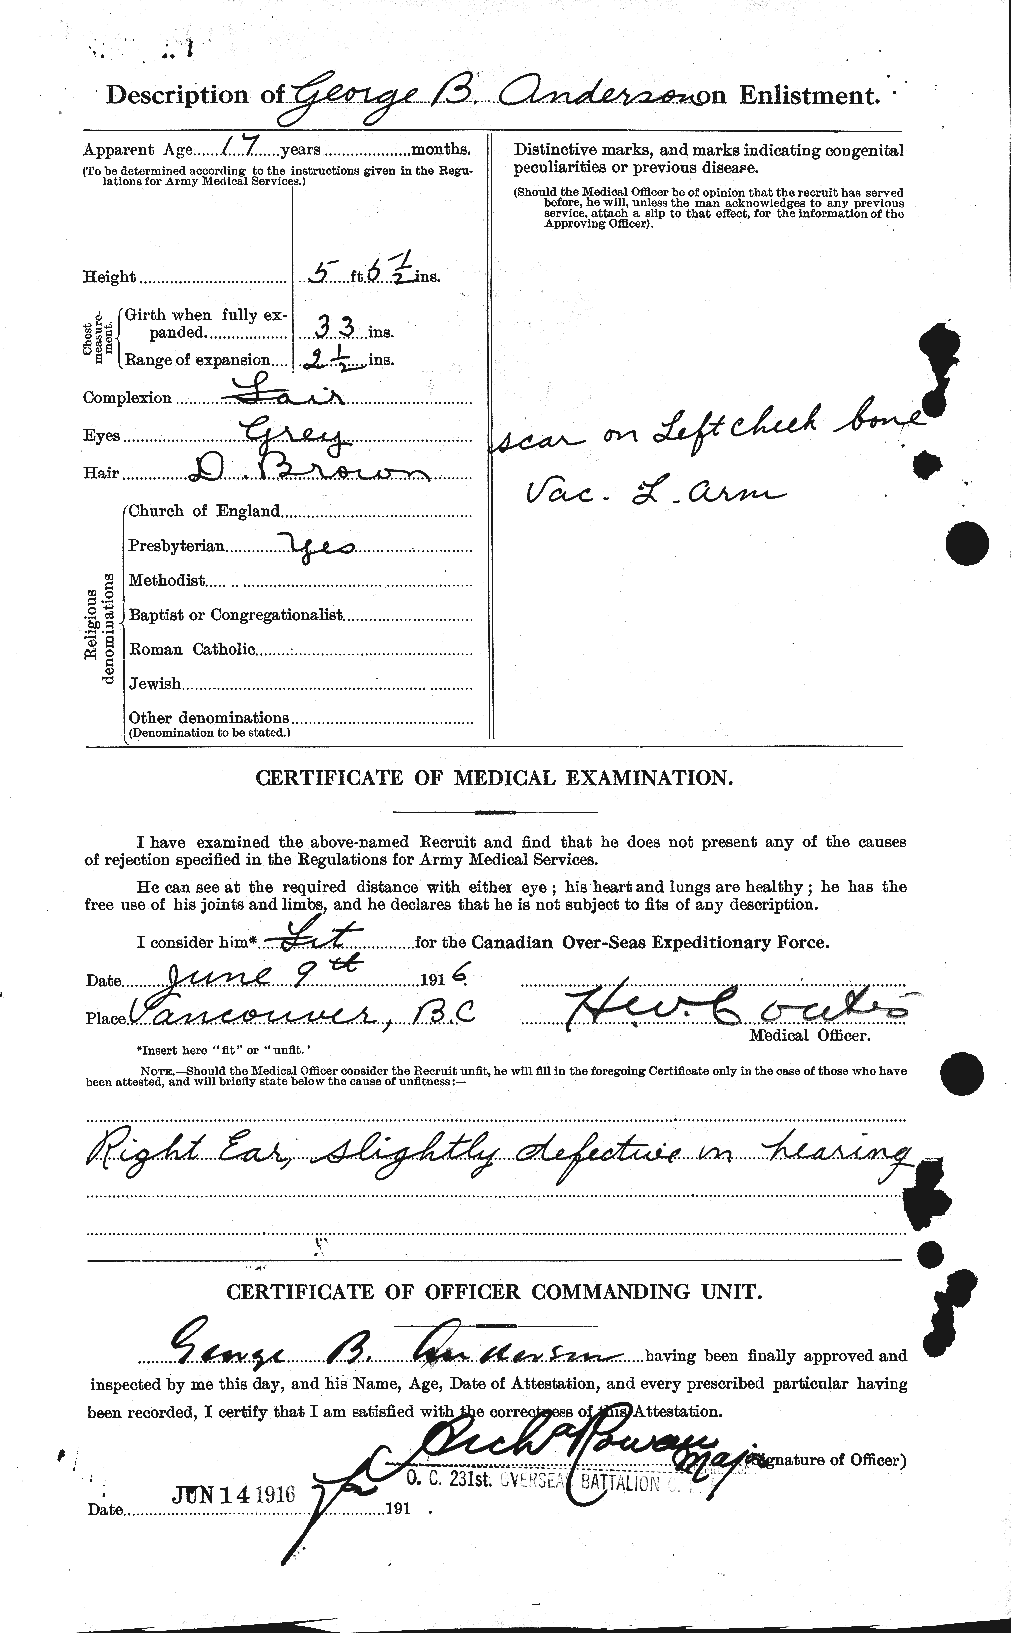 Personnel Records of the First World War - CEF 209737b